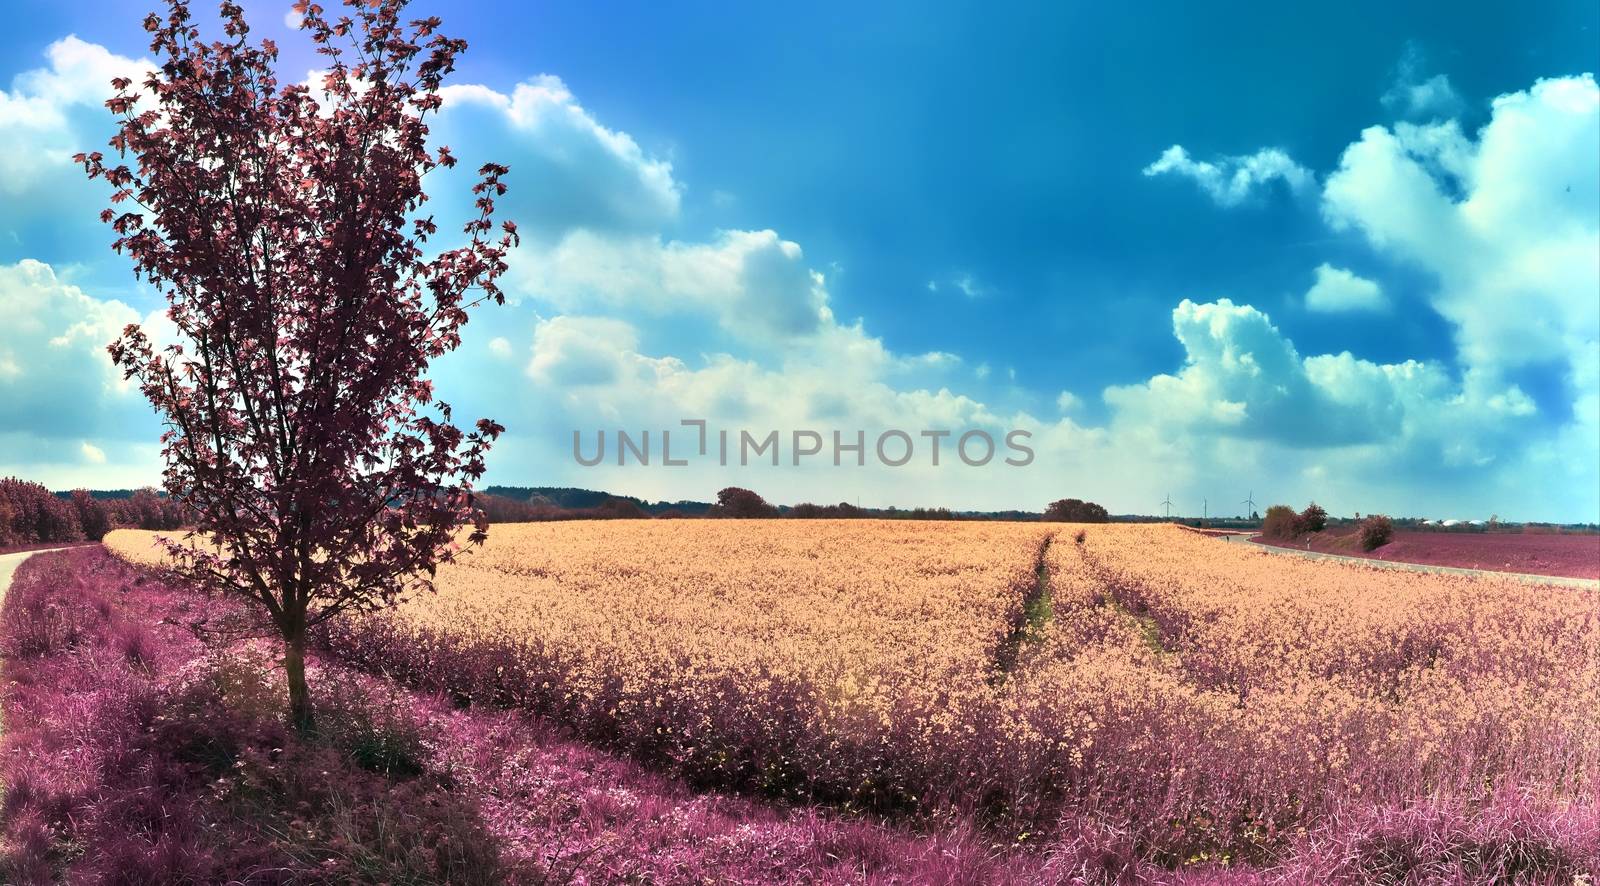 Beautiful and colorful fantasy landscape in an asian purple infr by MP_foto71